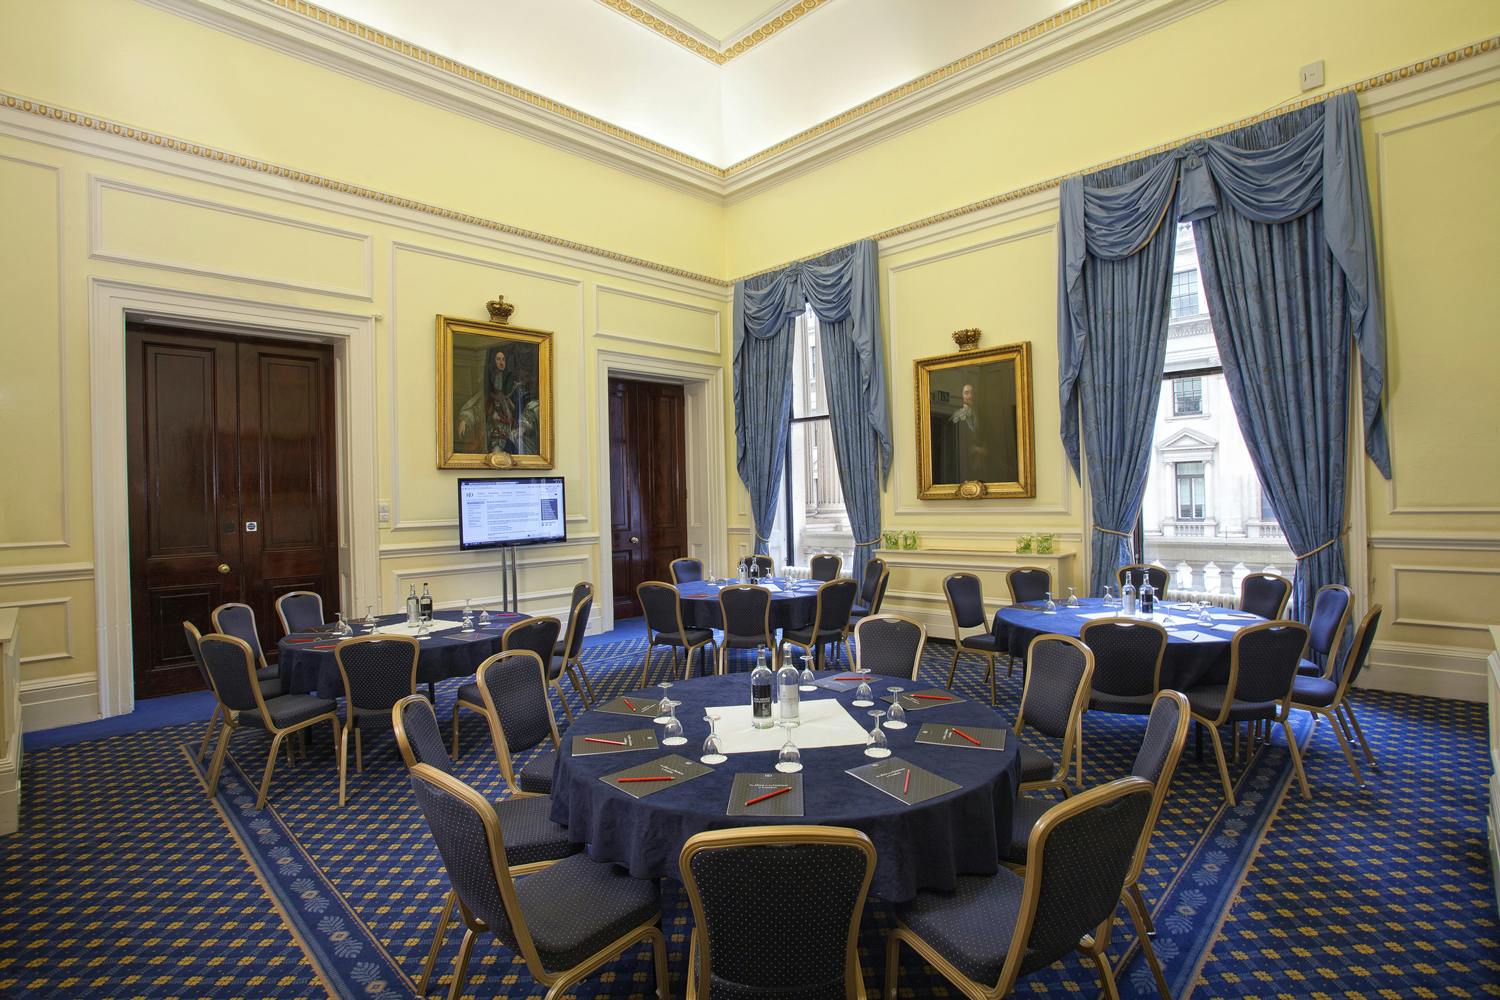 116 Pall Mall - St James Rooms  image 1